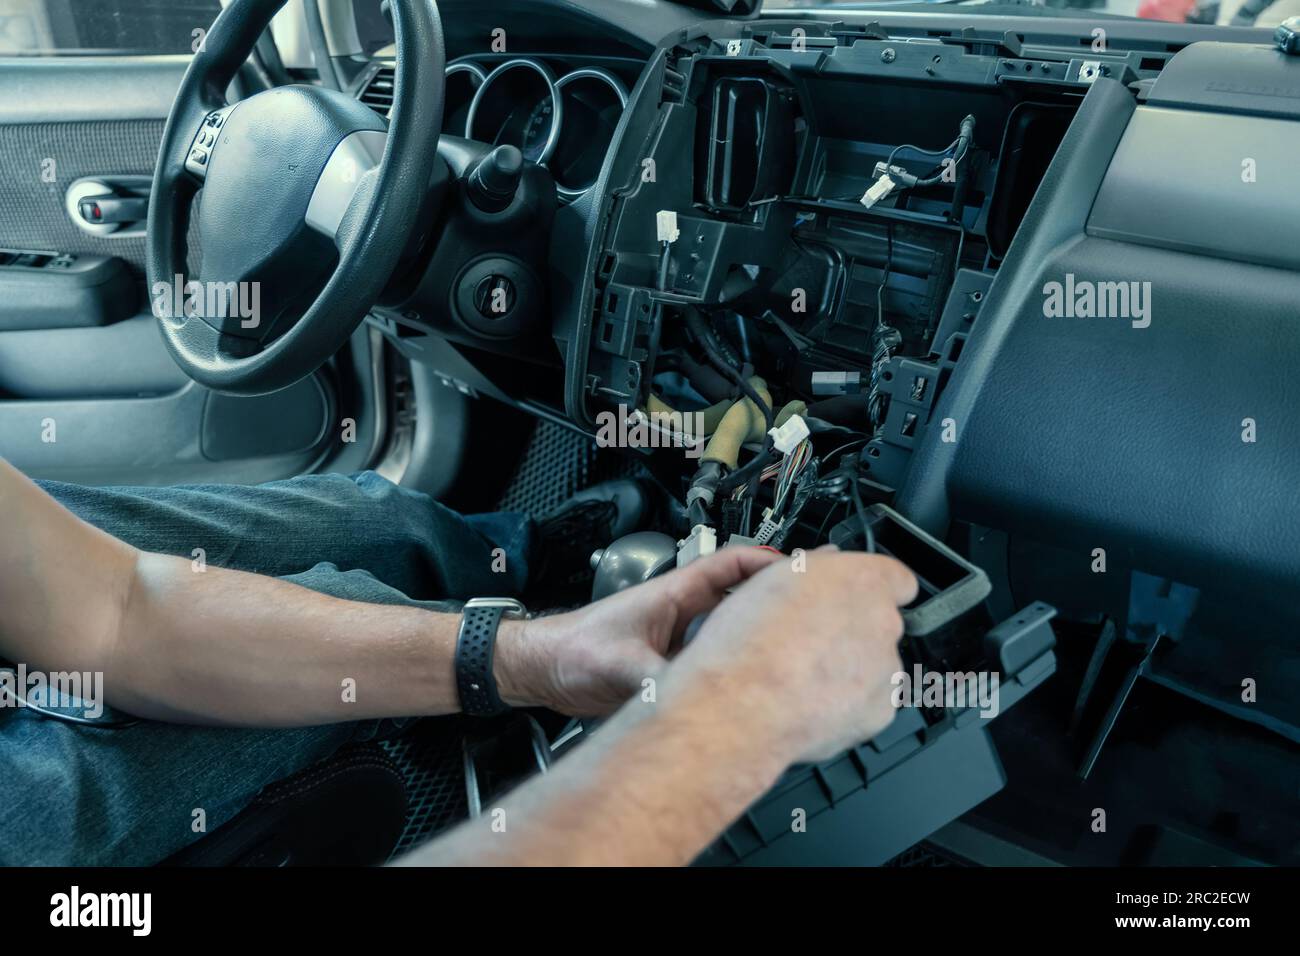 Auto in Car Service, process of installing radio sound system. Auto electric hands on dashboard fixing problem close-up. Stock Photo